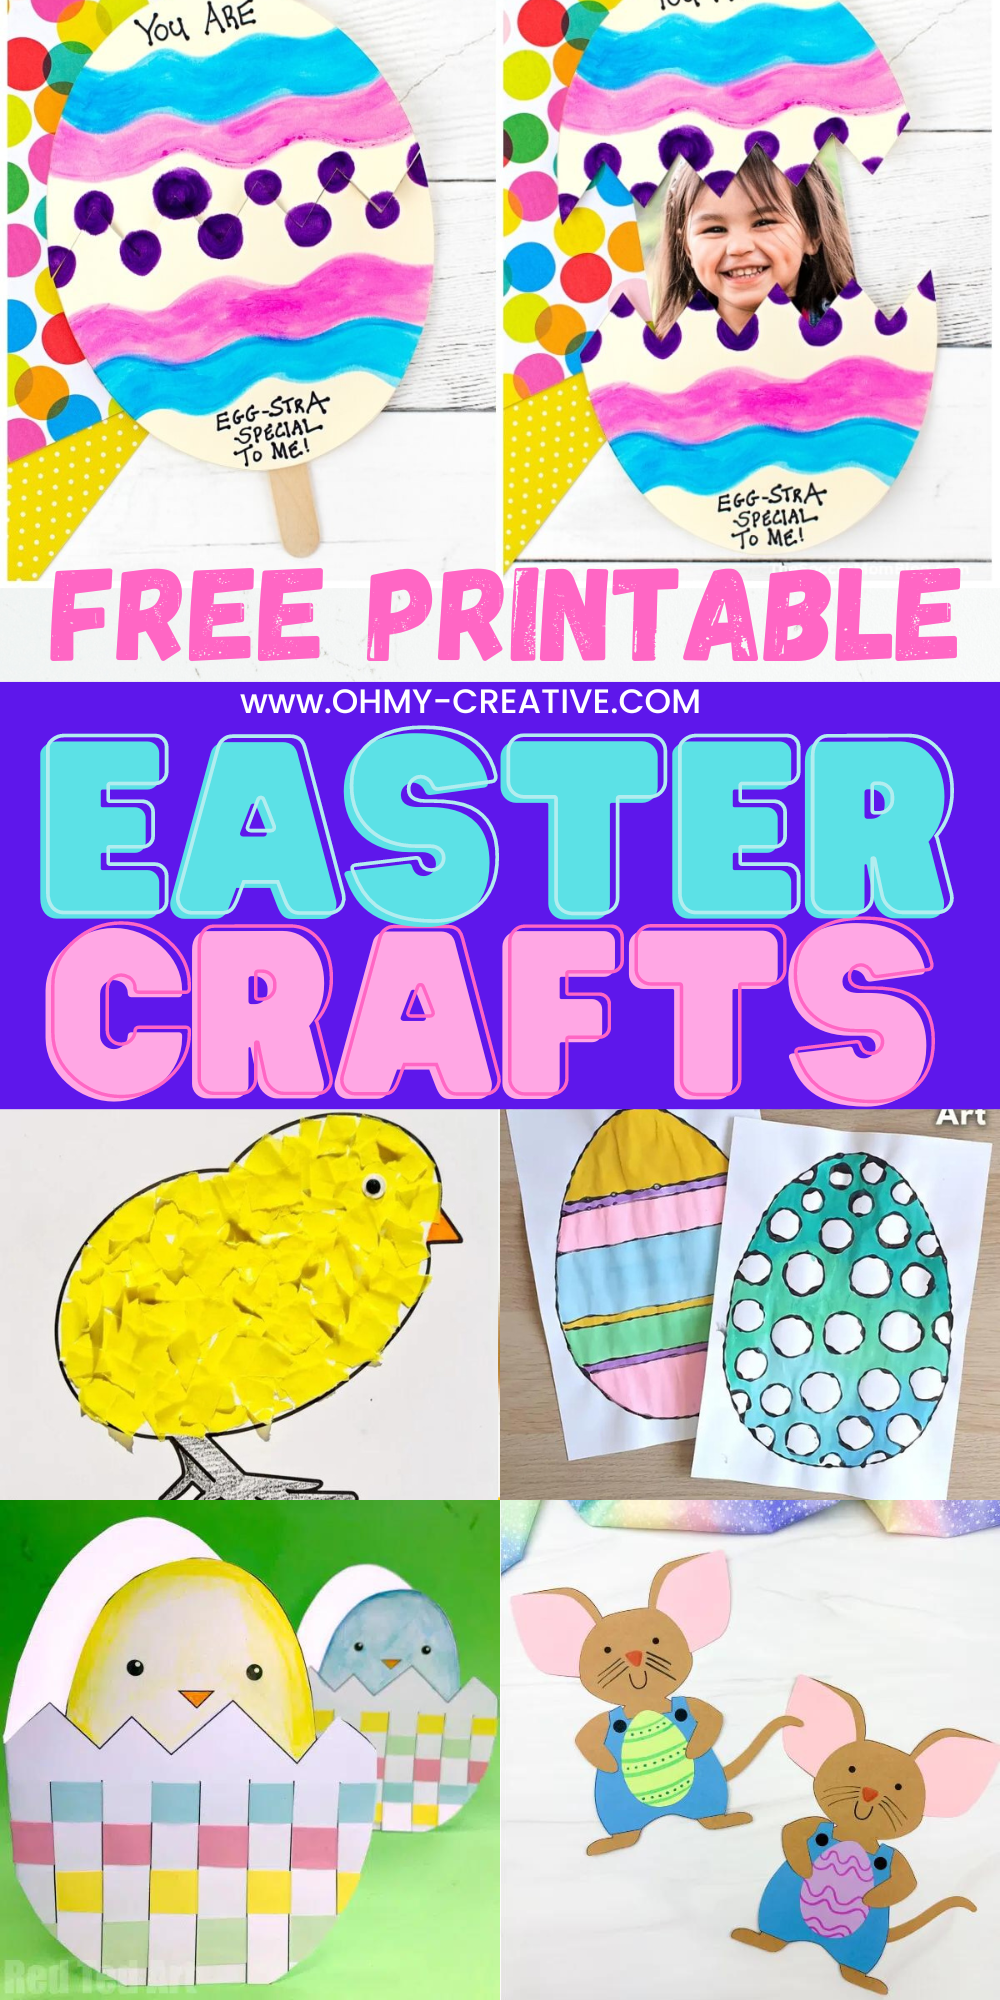 A pin collage for easter crafts for kids that include free printables.